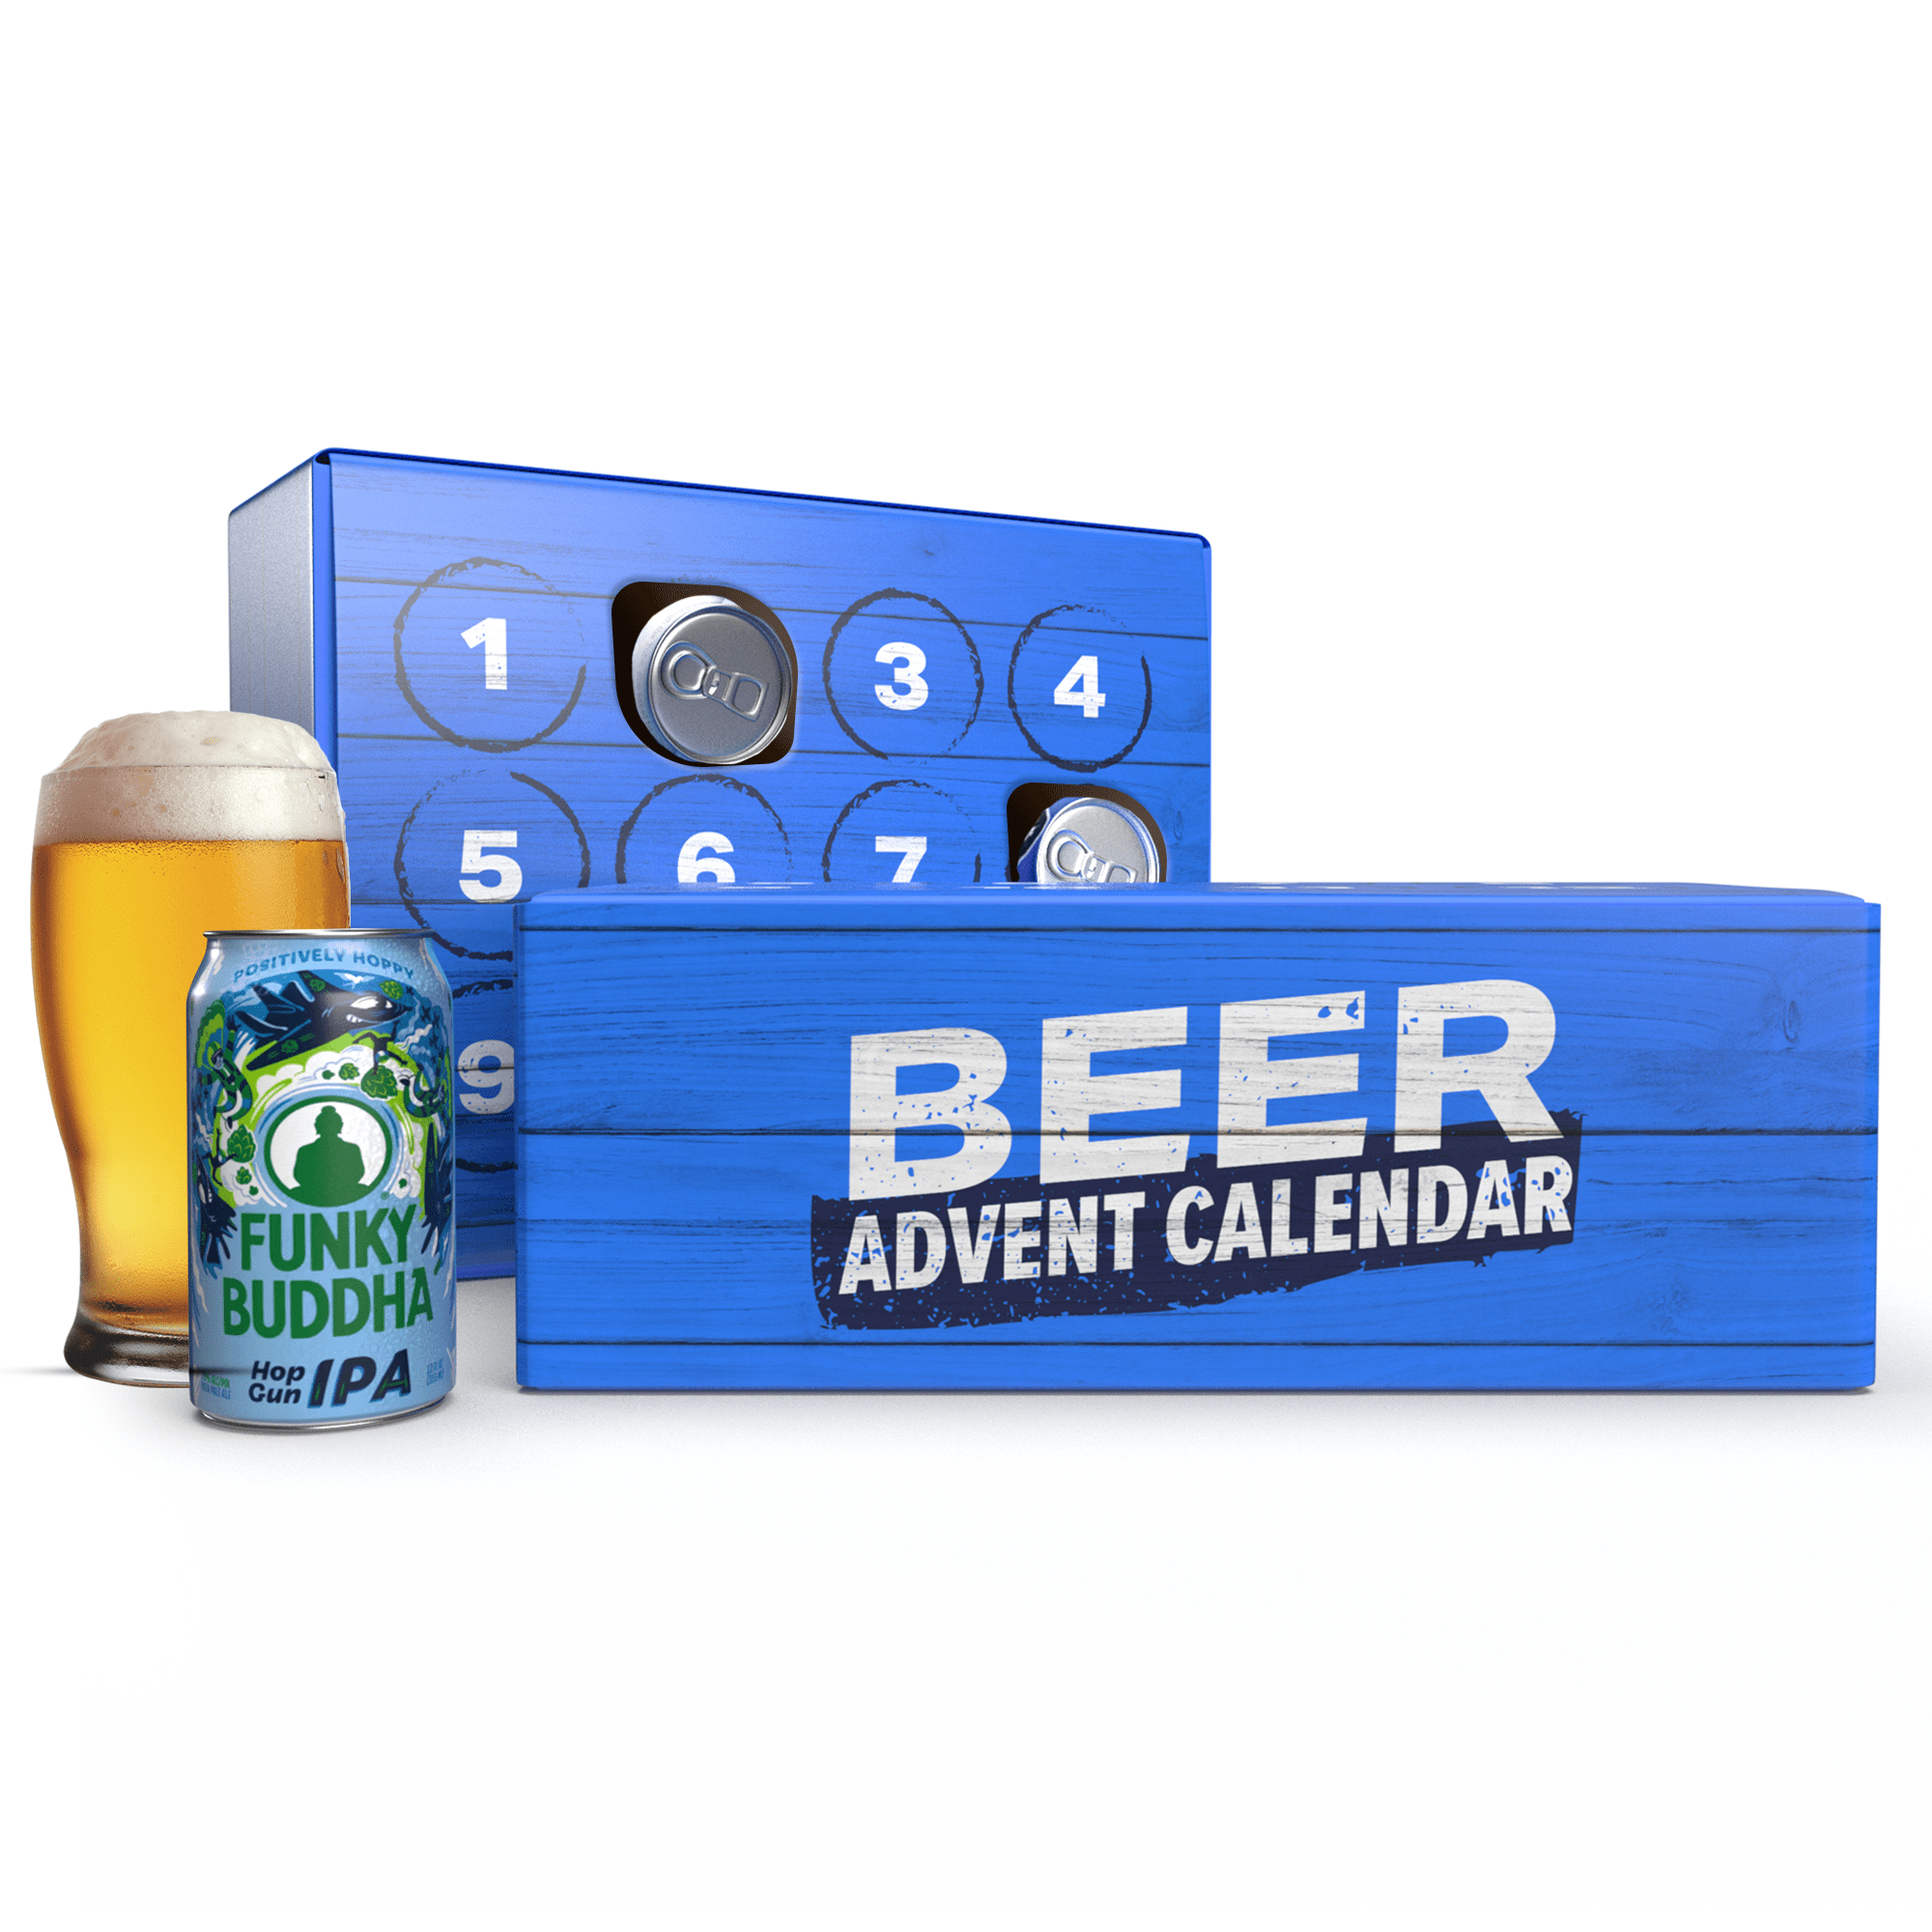 Holiday gifts for Bay Area beer lovers